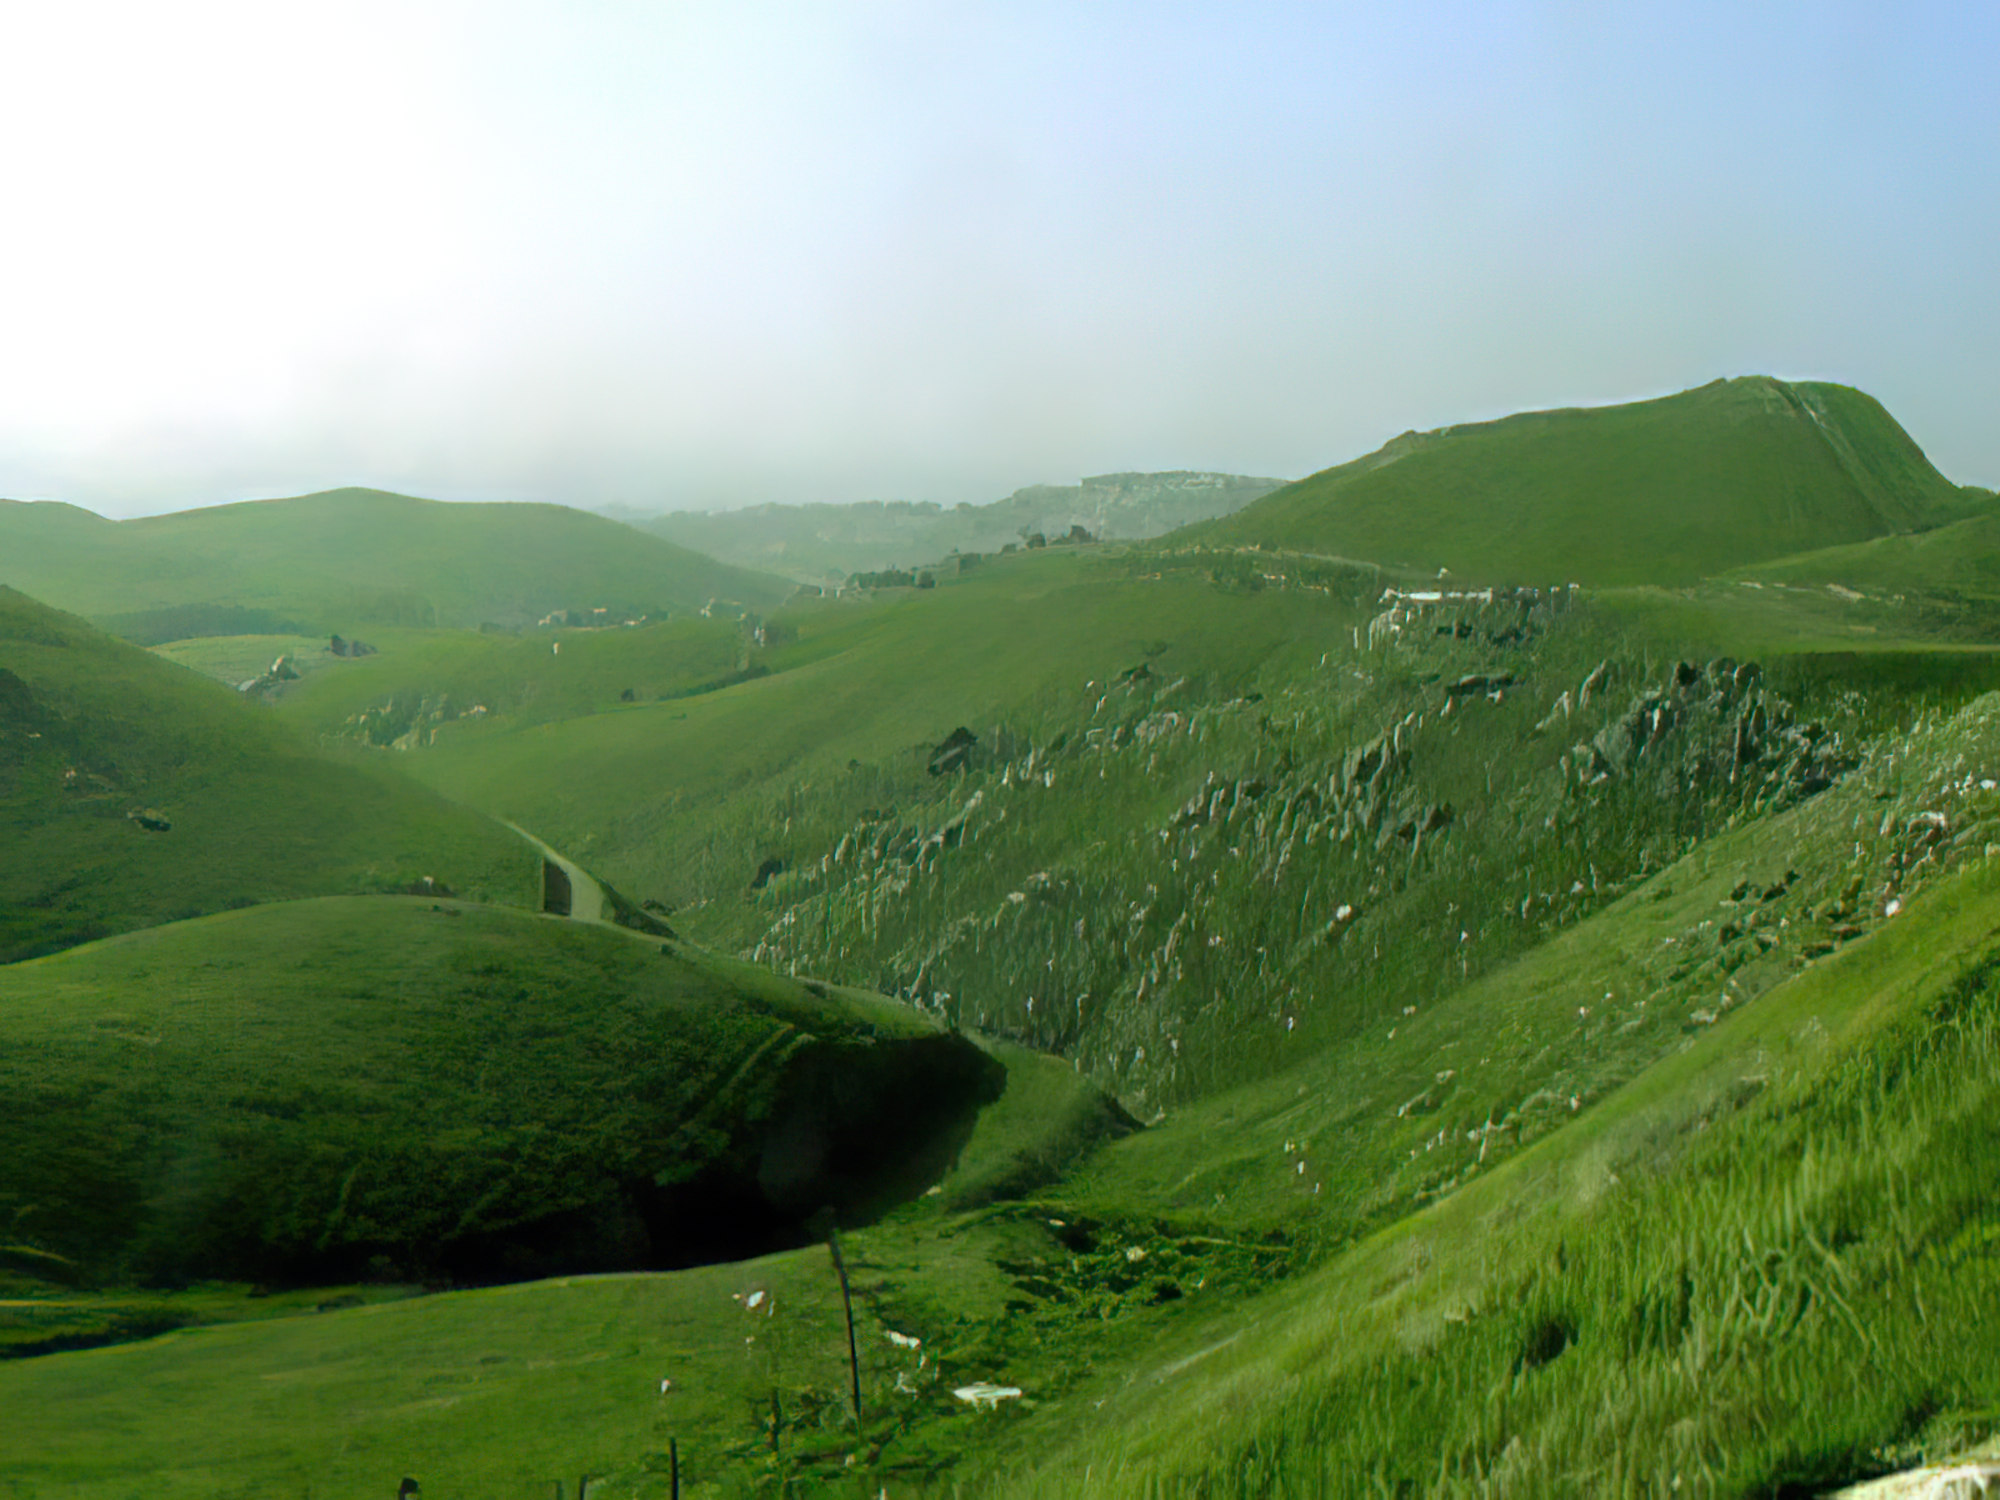 California's "golden hills" become green in January.